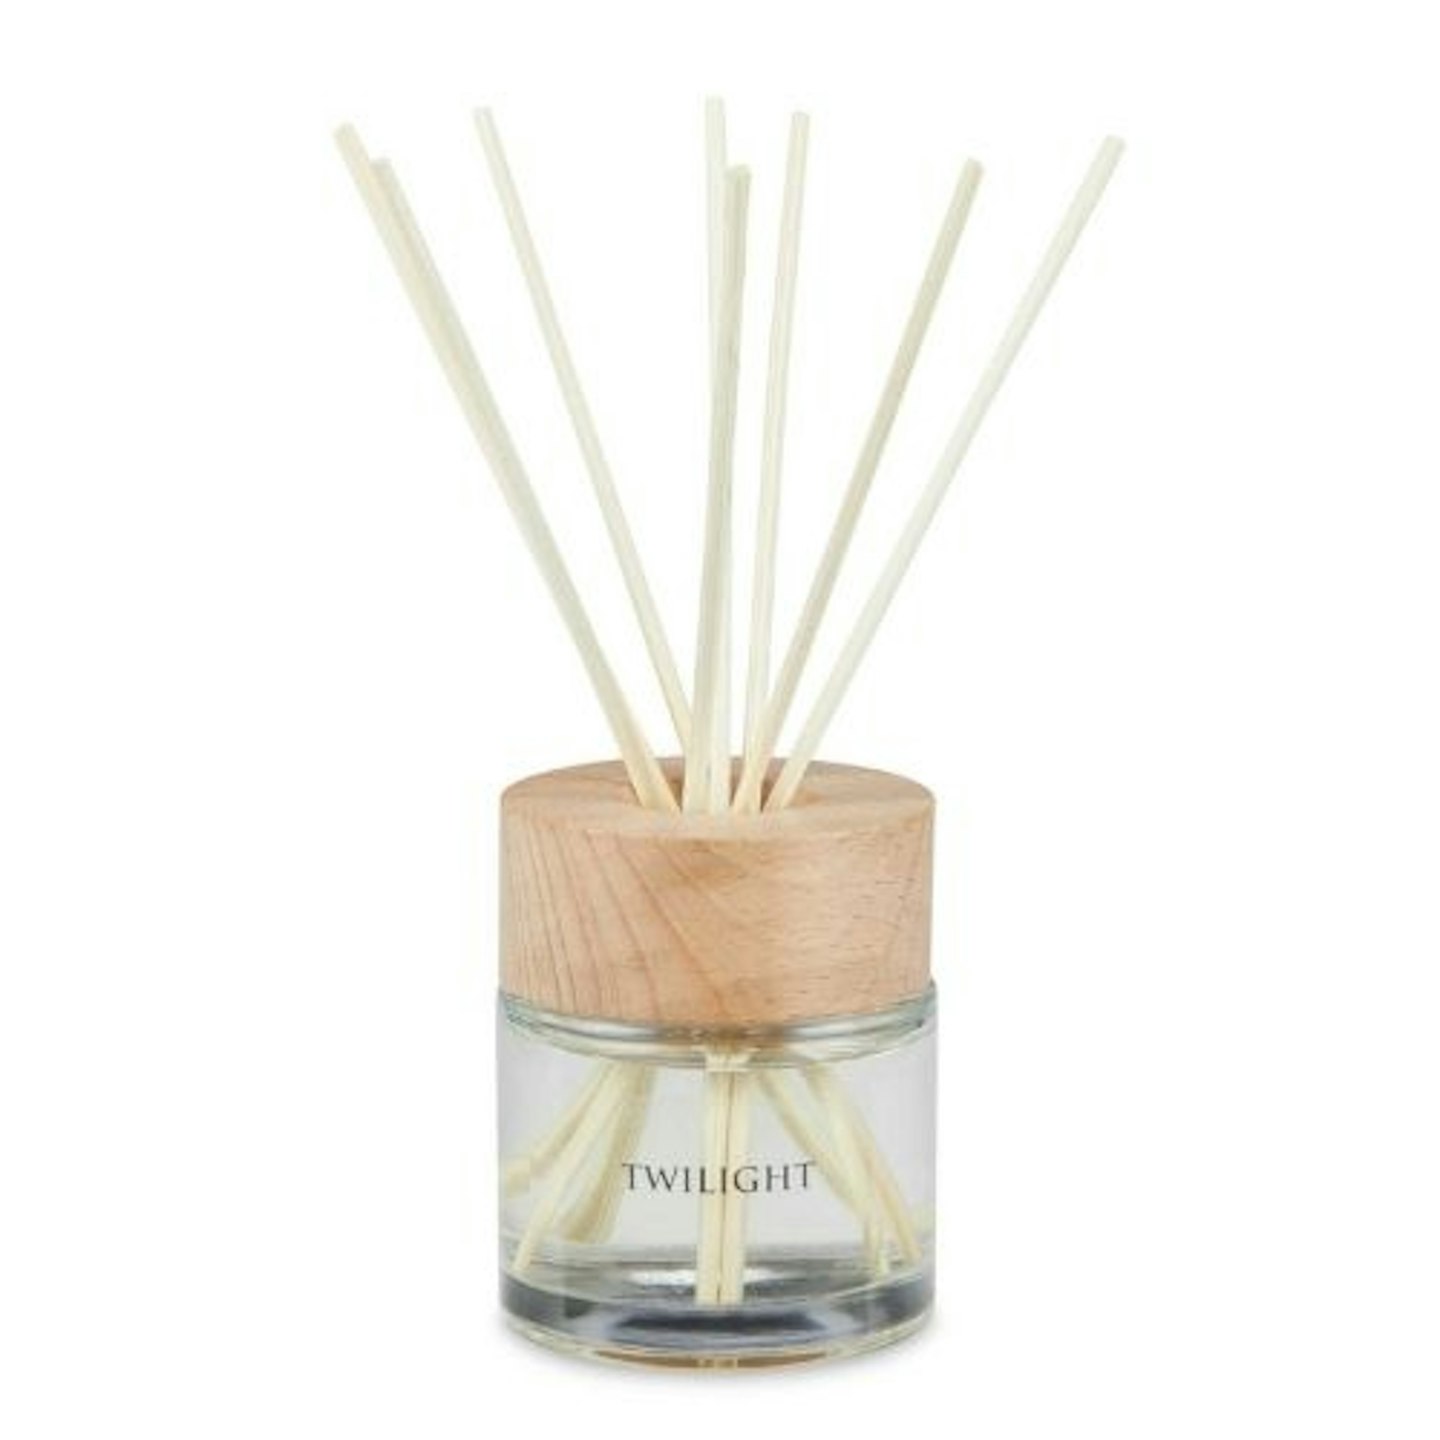 Aldi's Hotel Collection: Twilight Reed Diffuser